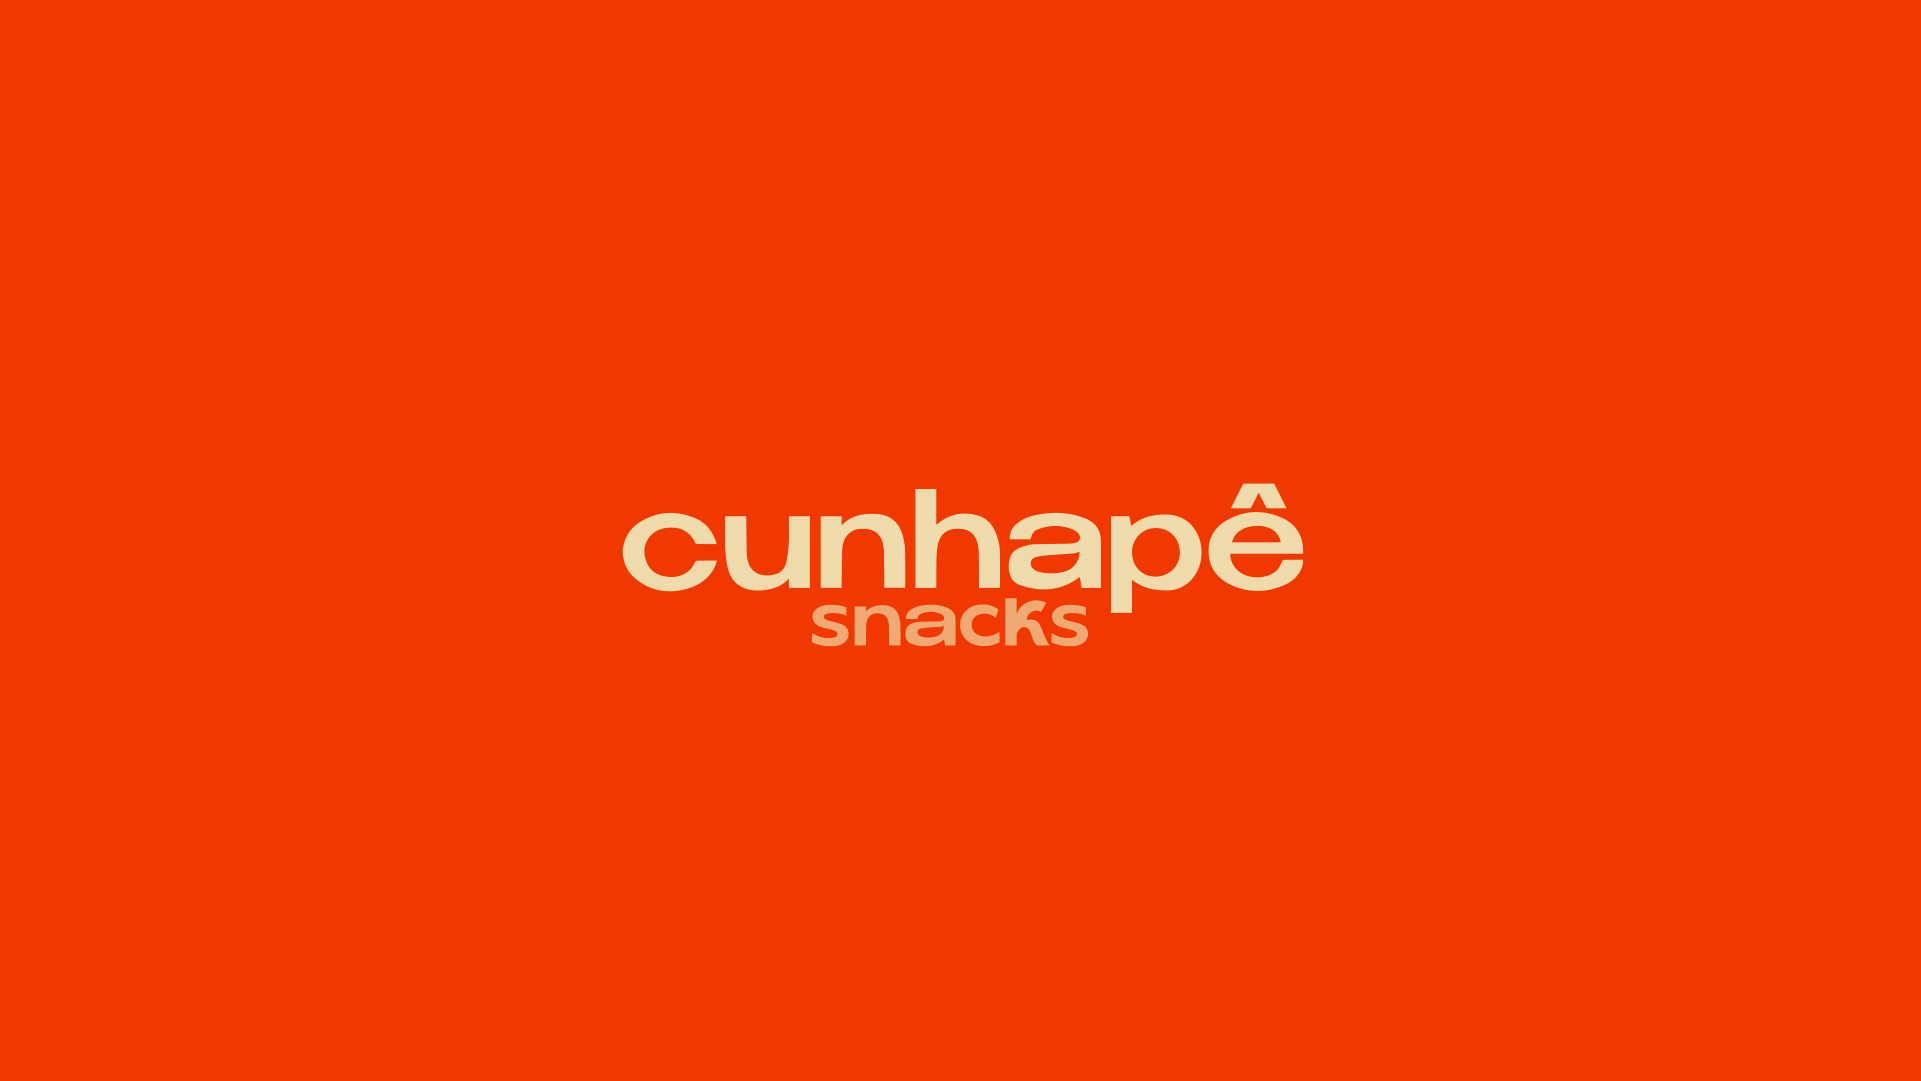 Cunhapê Brand Identity and Packaging Design Created by PSNDesign